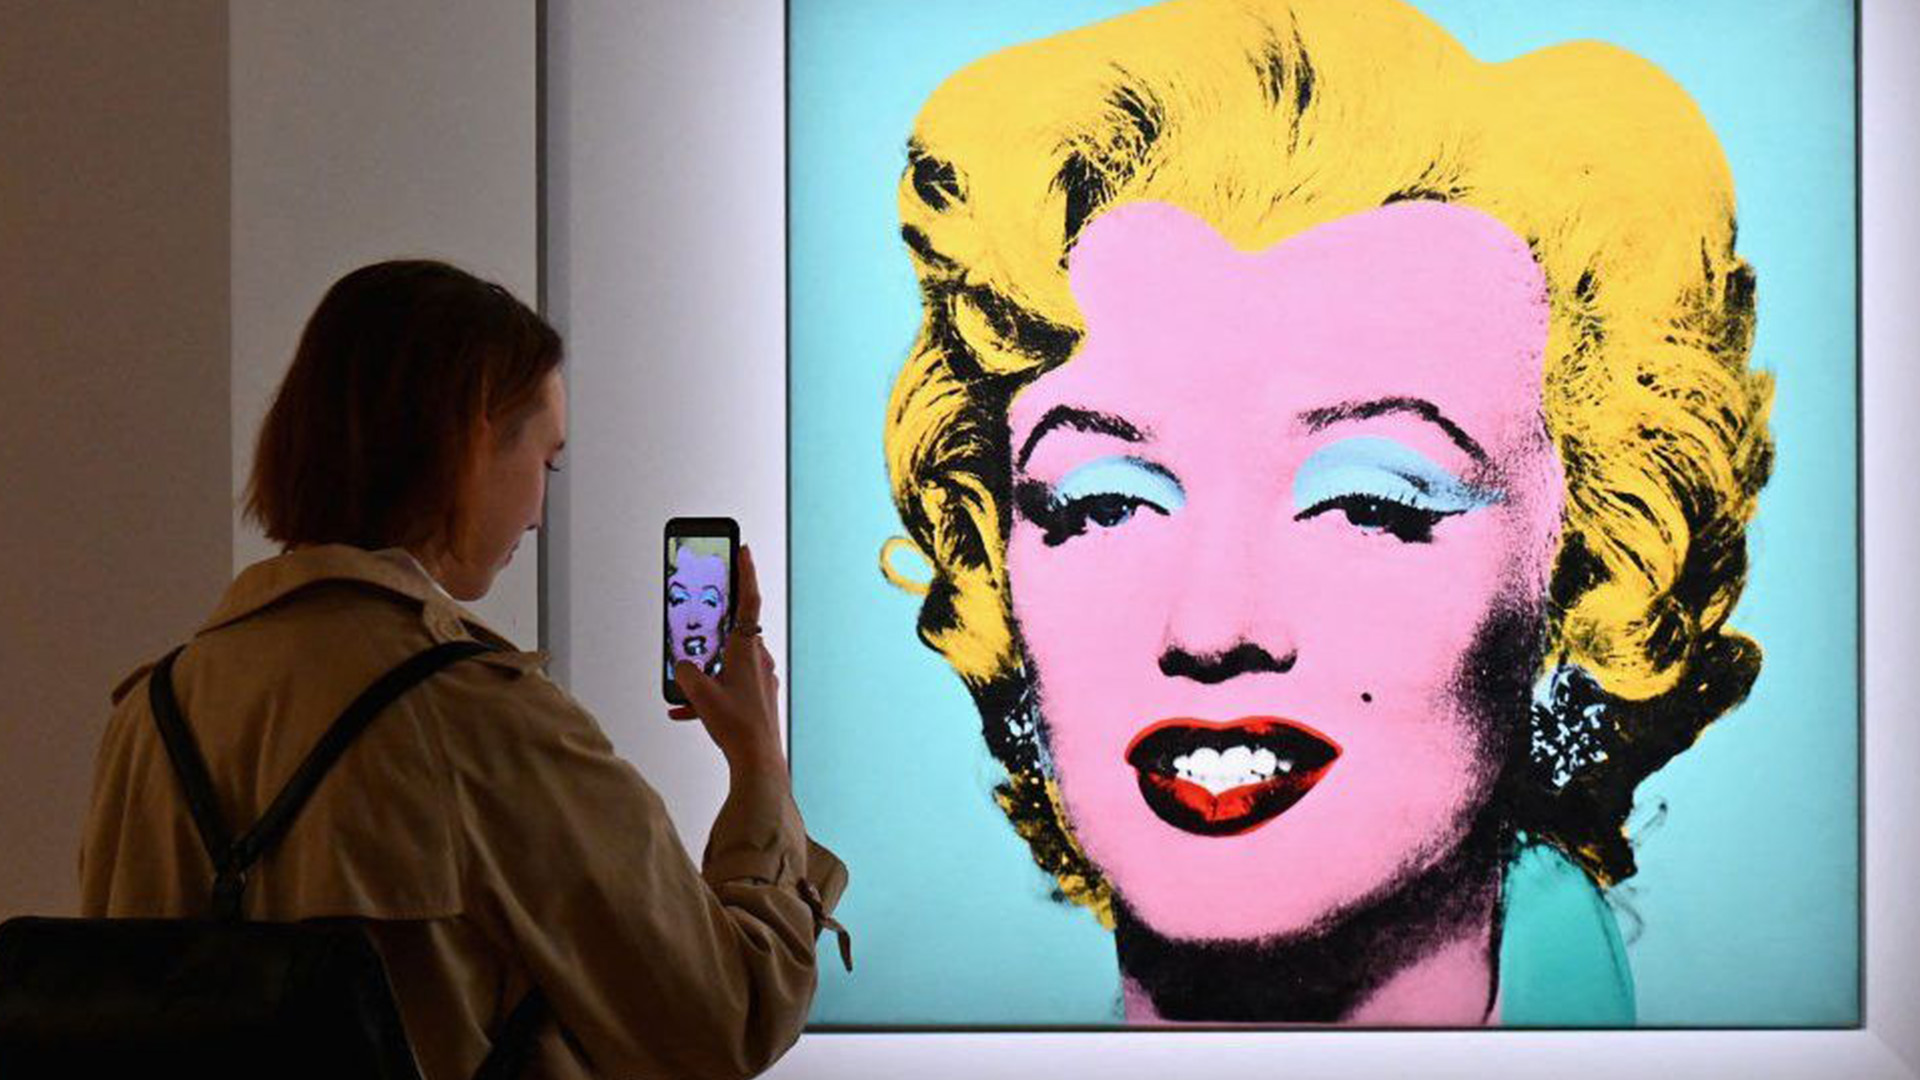 Andy Warhol's "Shot Sage Blue Marilyn" at an auction preview in April - Photo Credit: BBC